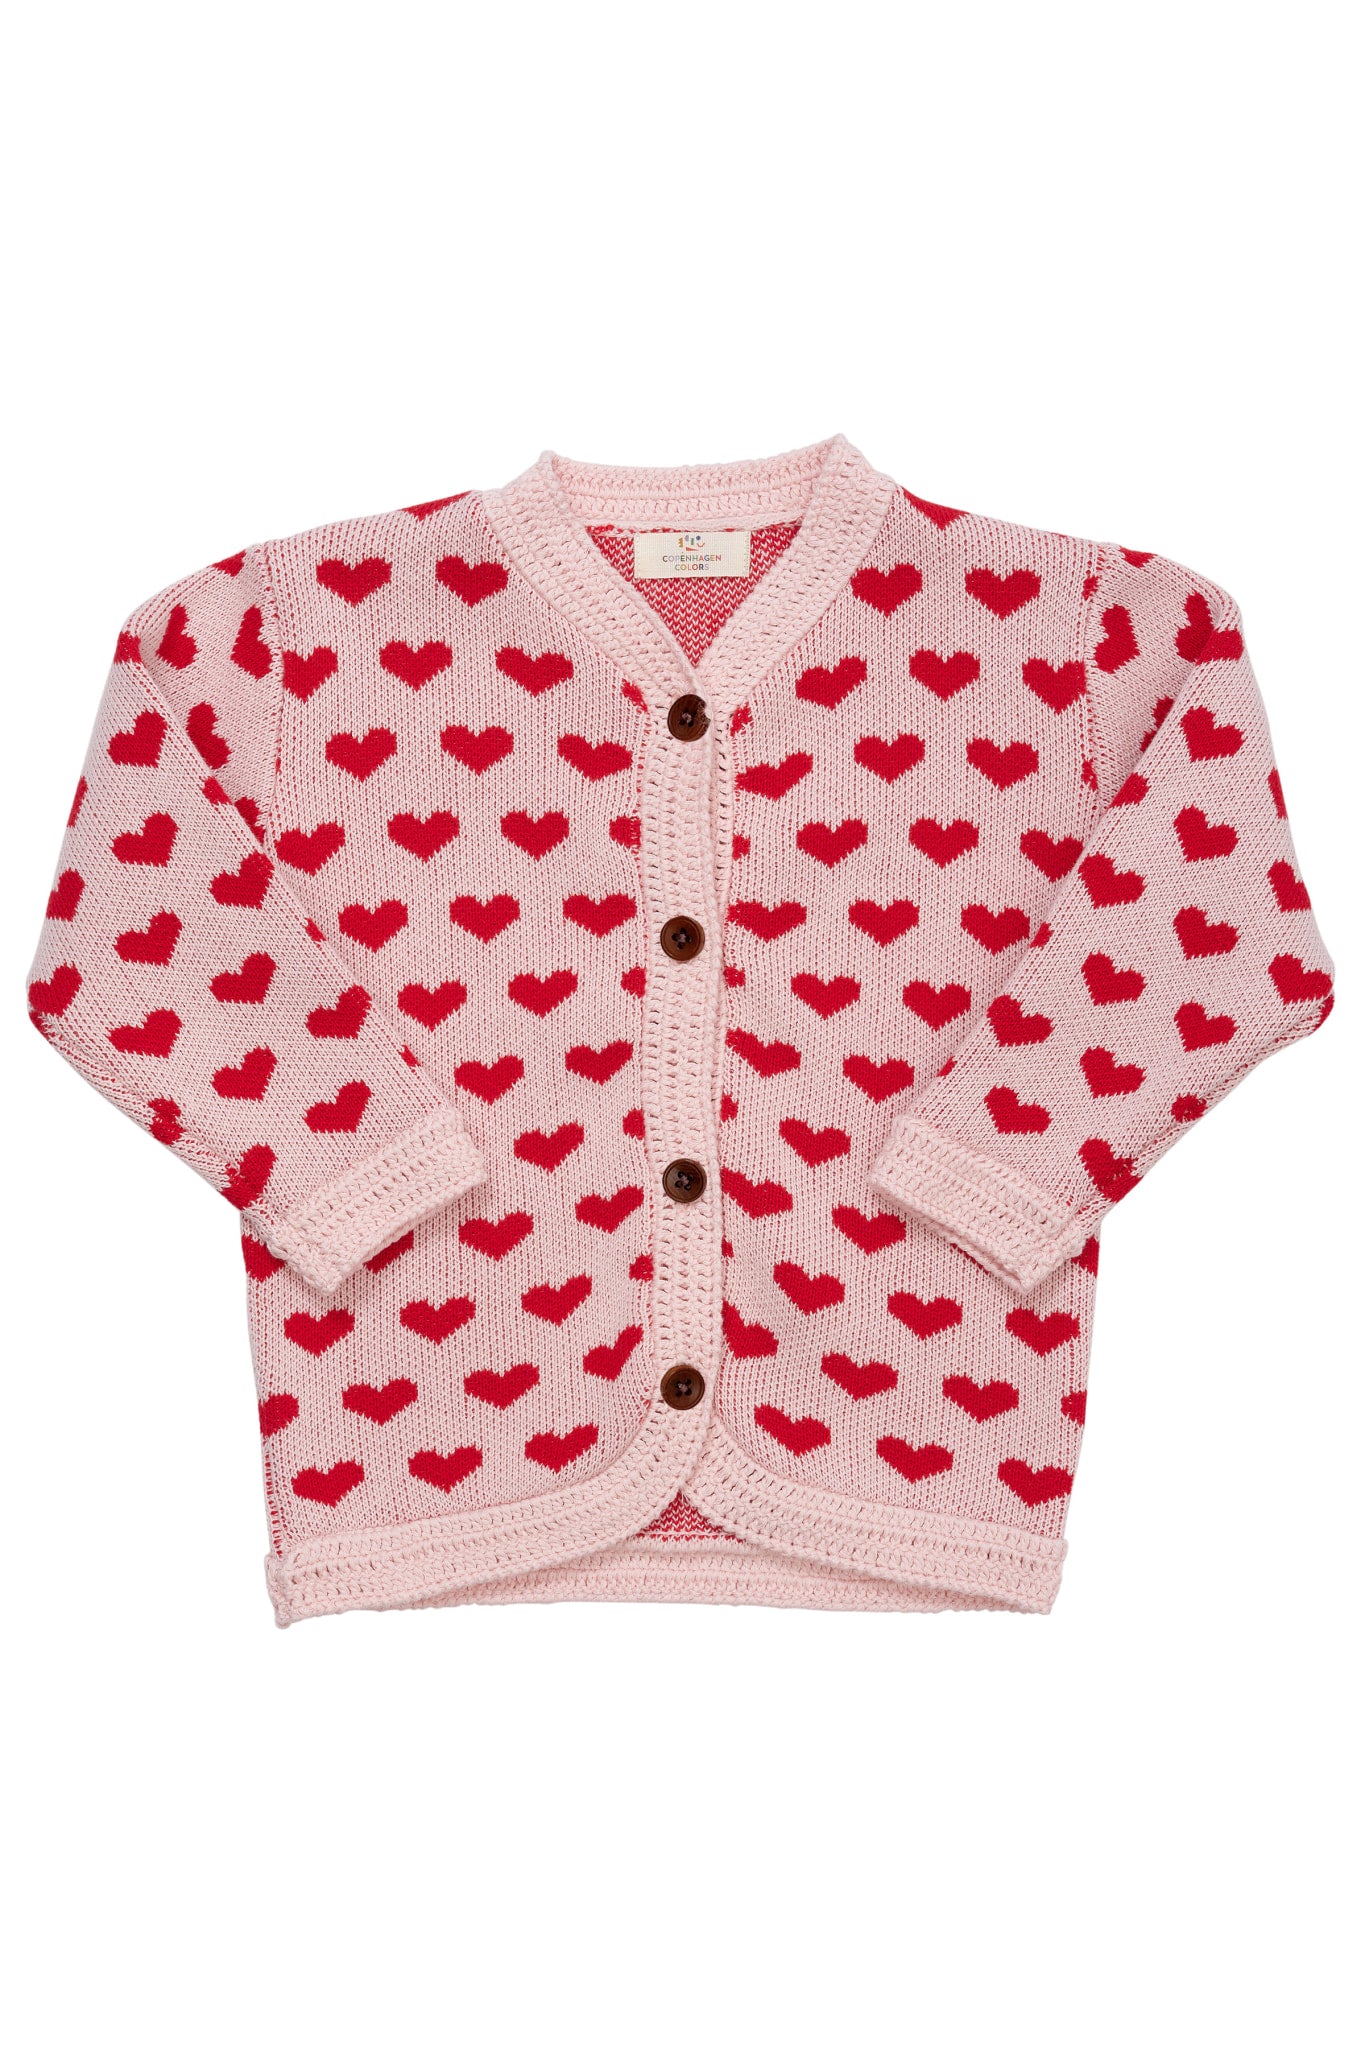 KNITTED CARDIGAN W. HEARTS - DUSTY ROSE/RED COMB.